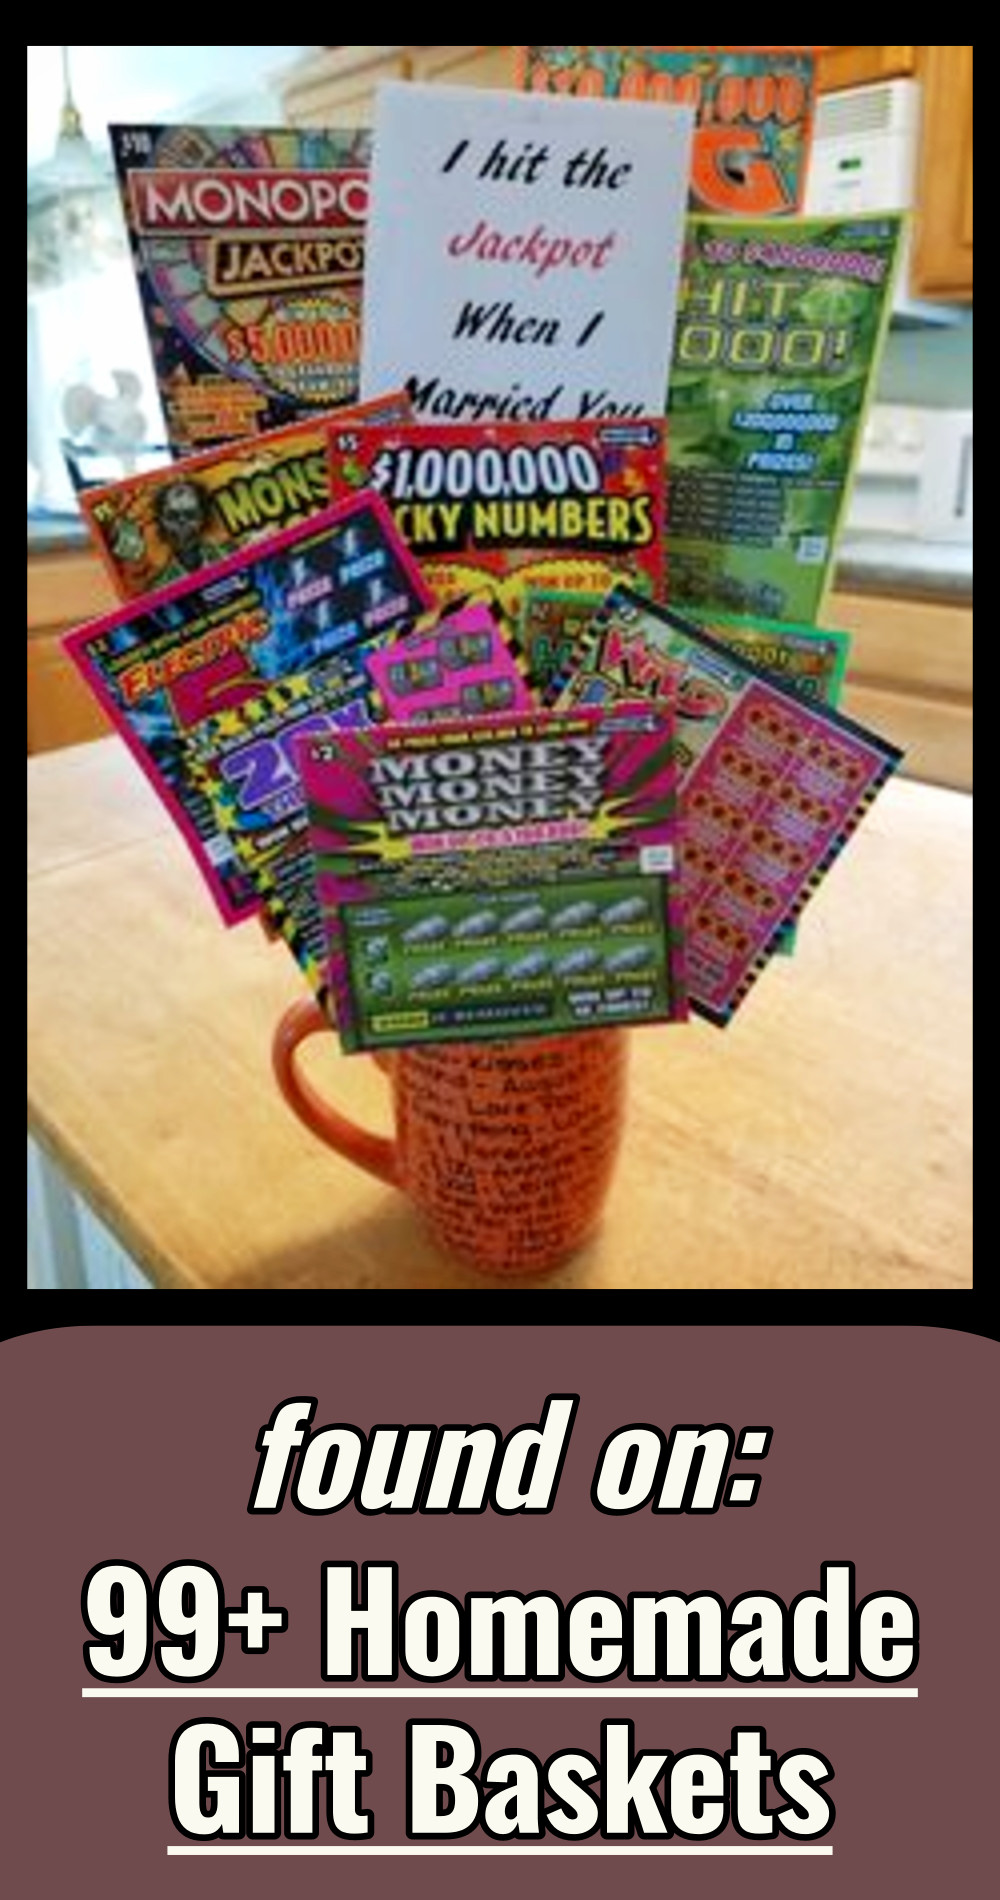 gift basket mug with lottery tickets that says 